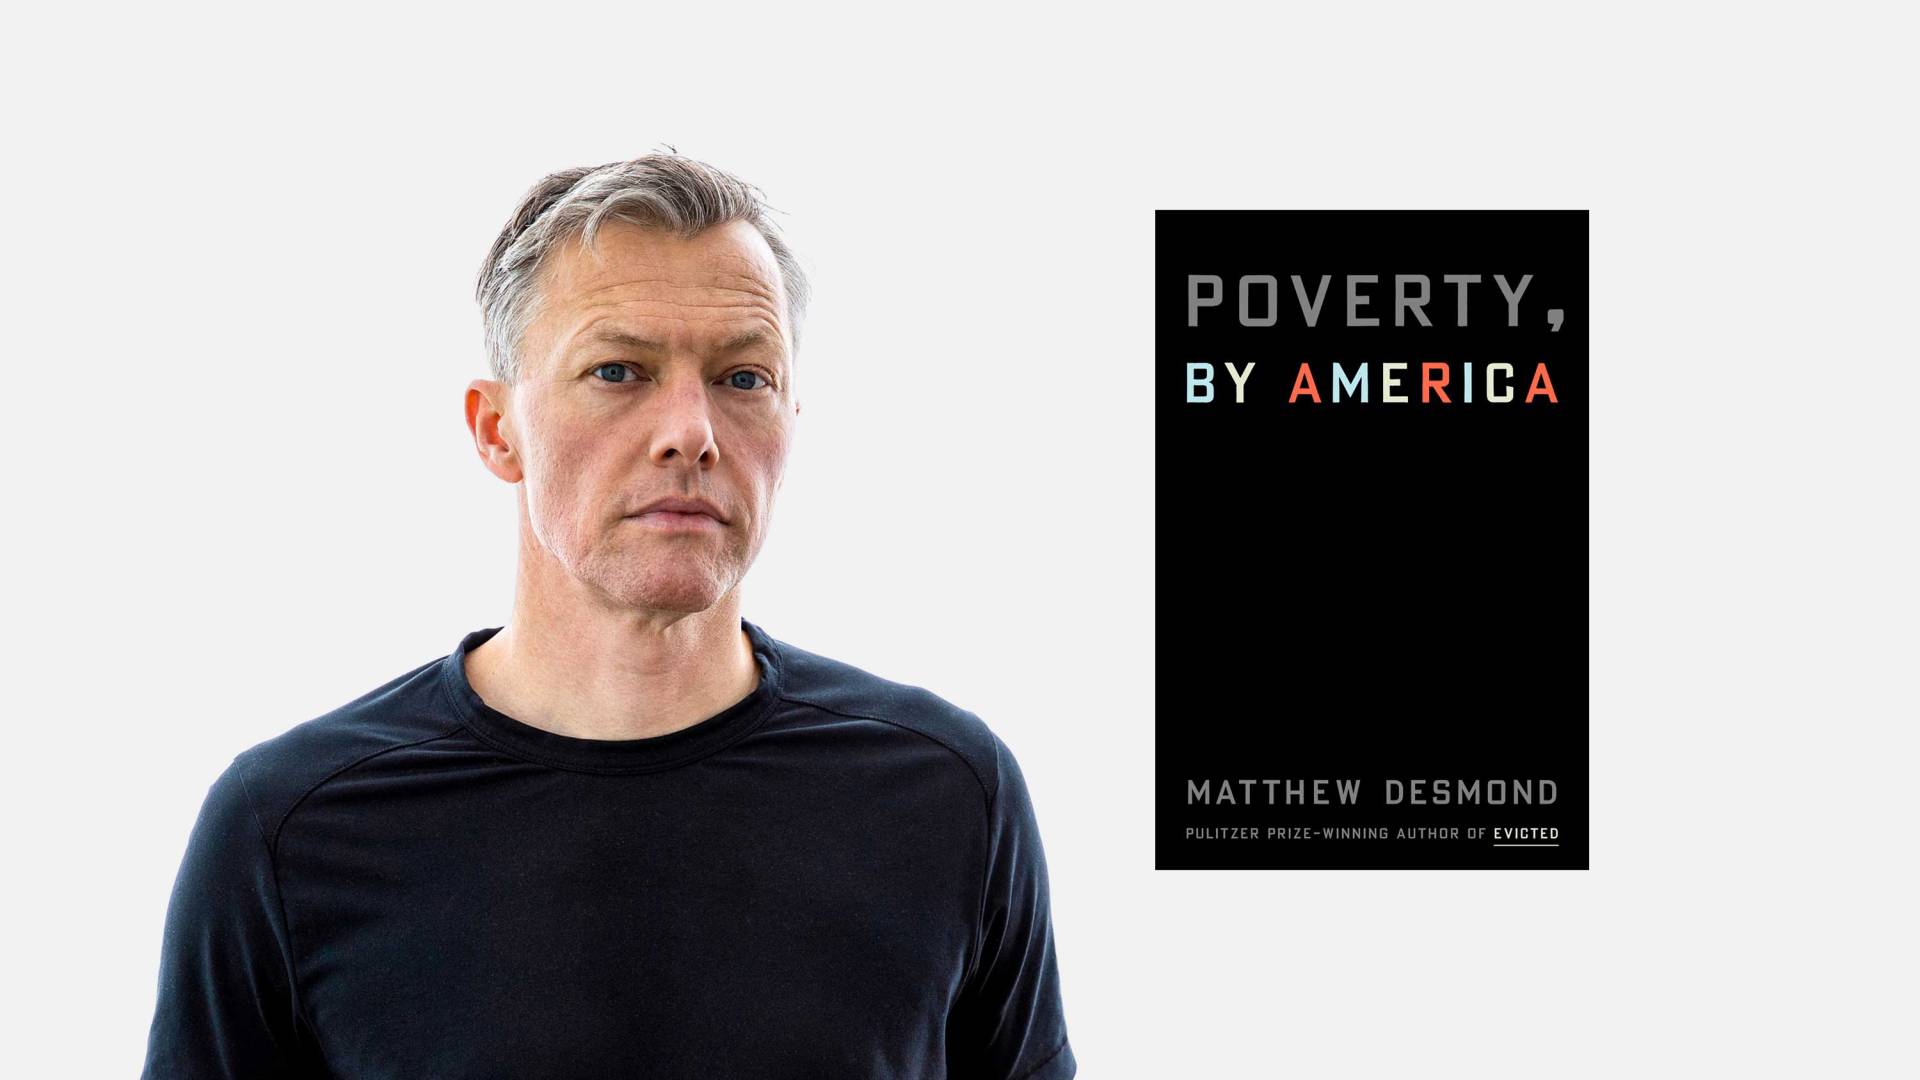 Matthew Desmond  and the book cover of his book, "Poverty"